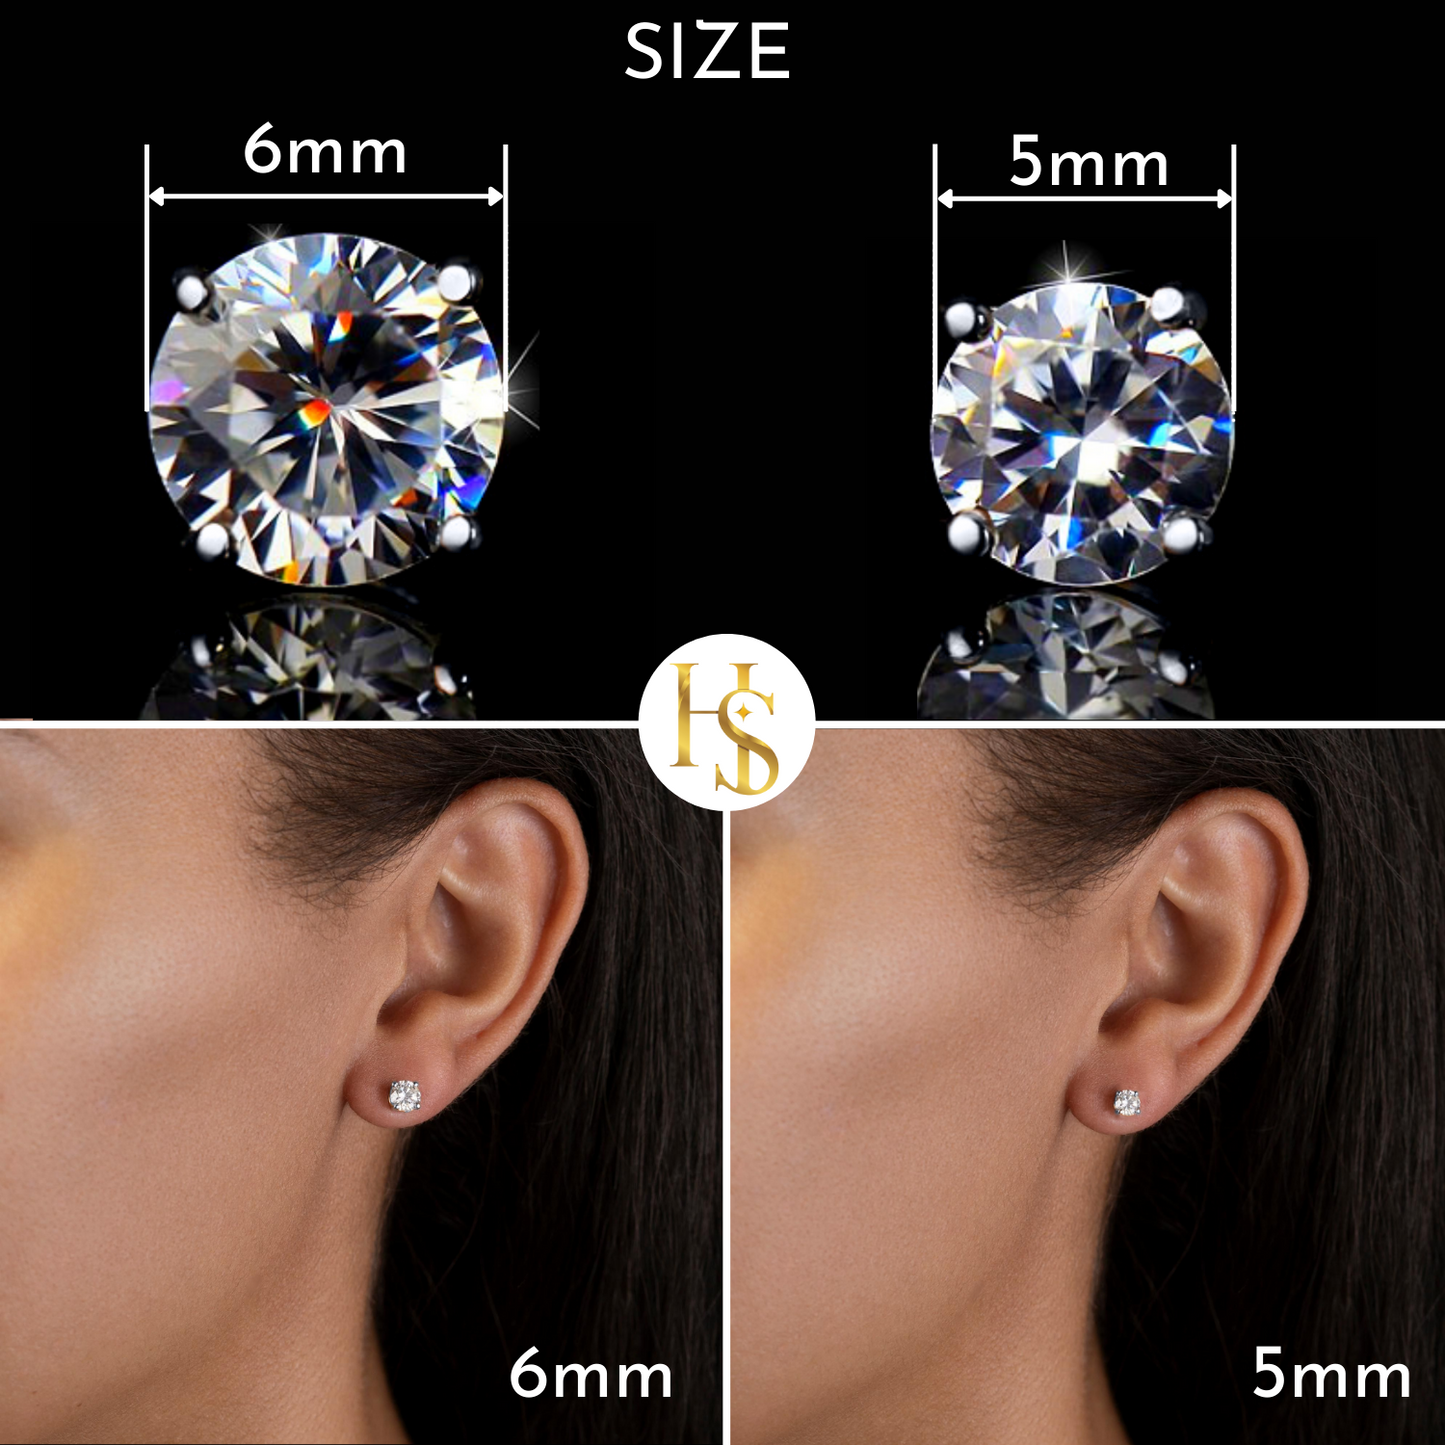 Solitaire Earrings in 92.5 Silver - Classic 4 prong setting embellished with Swarovski Zirconia